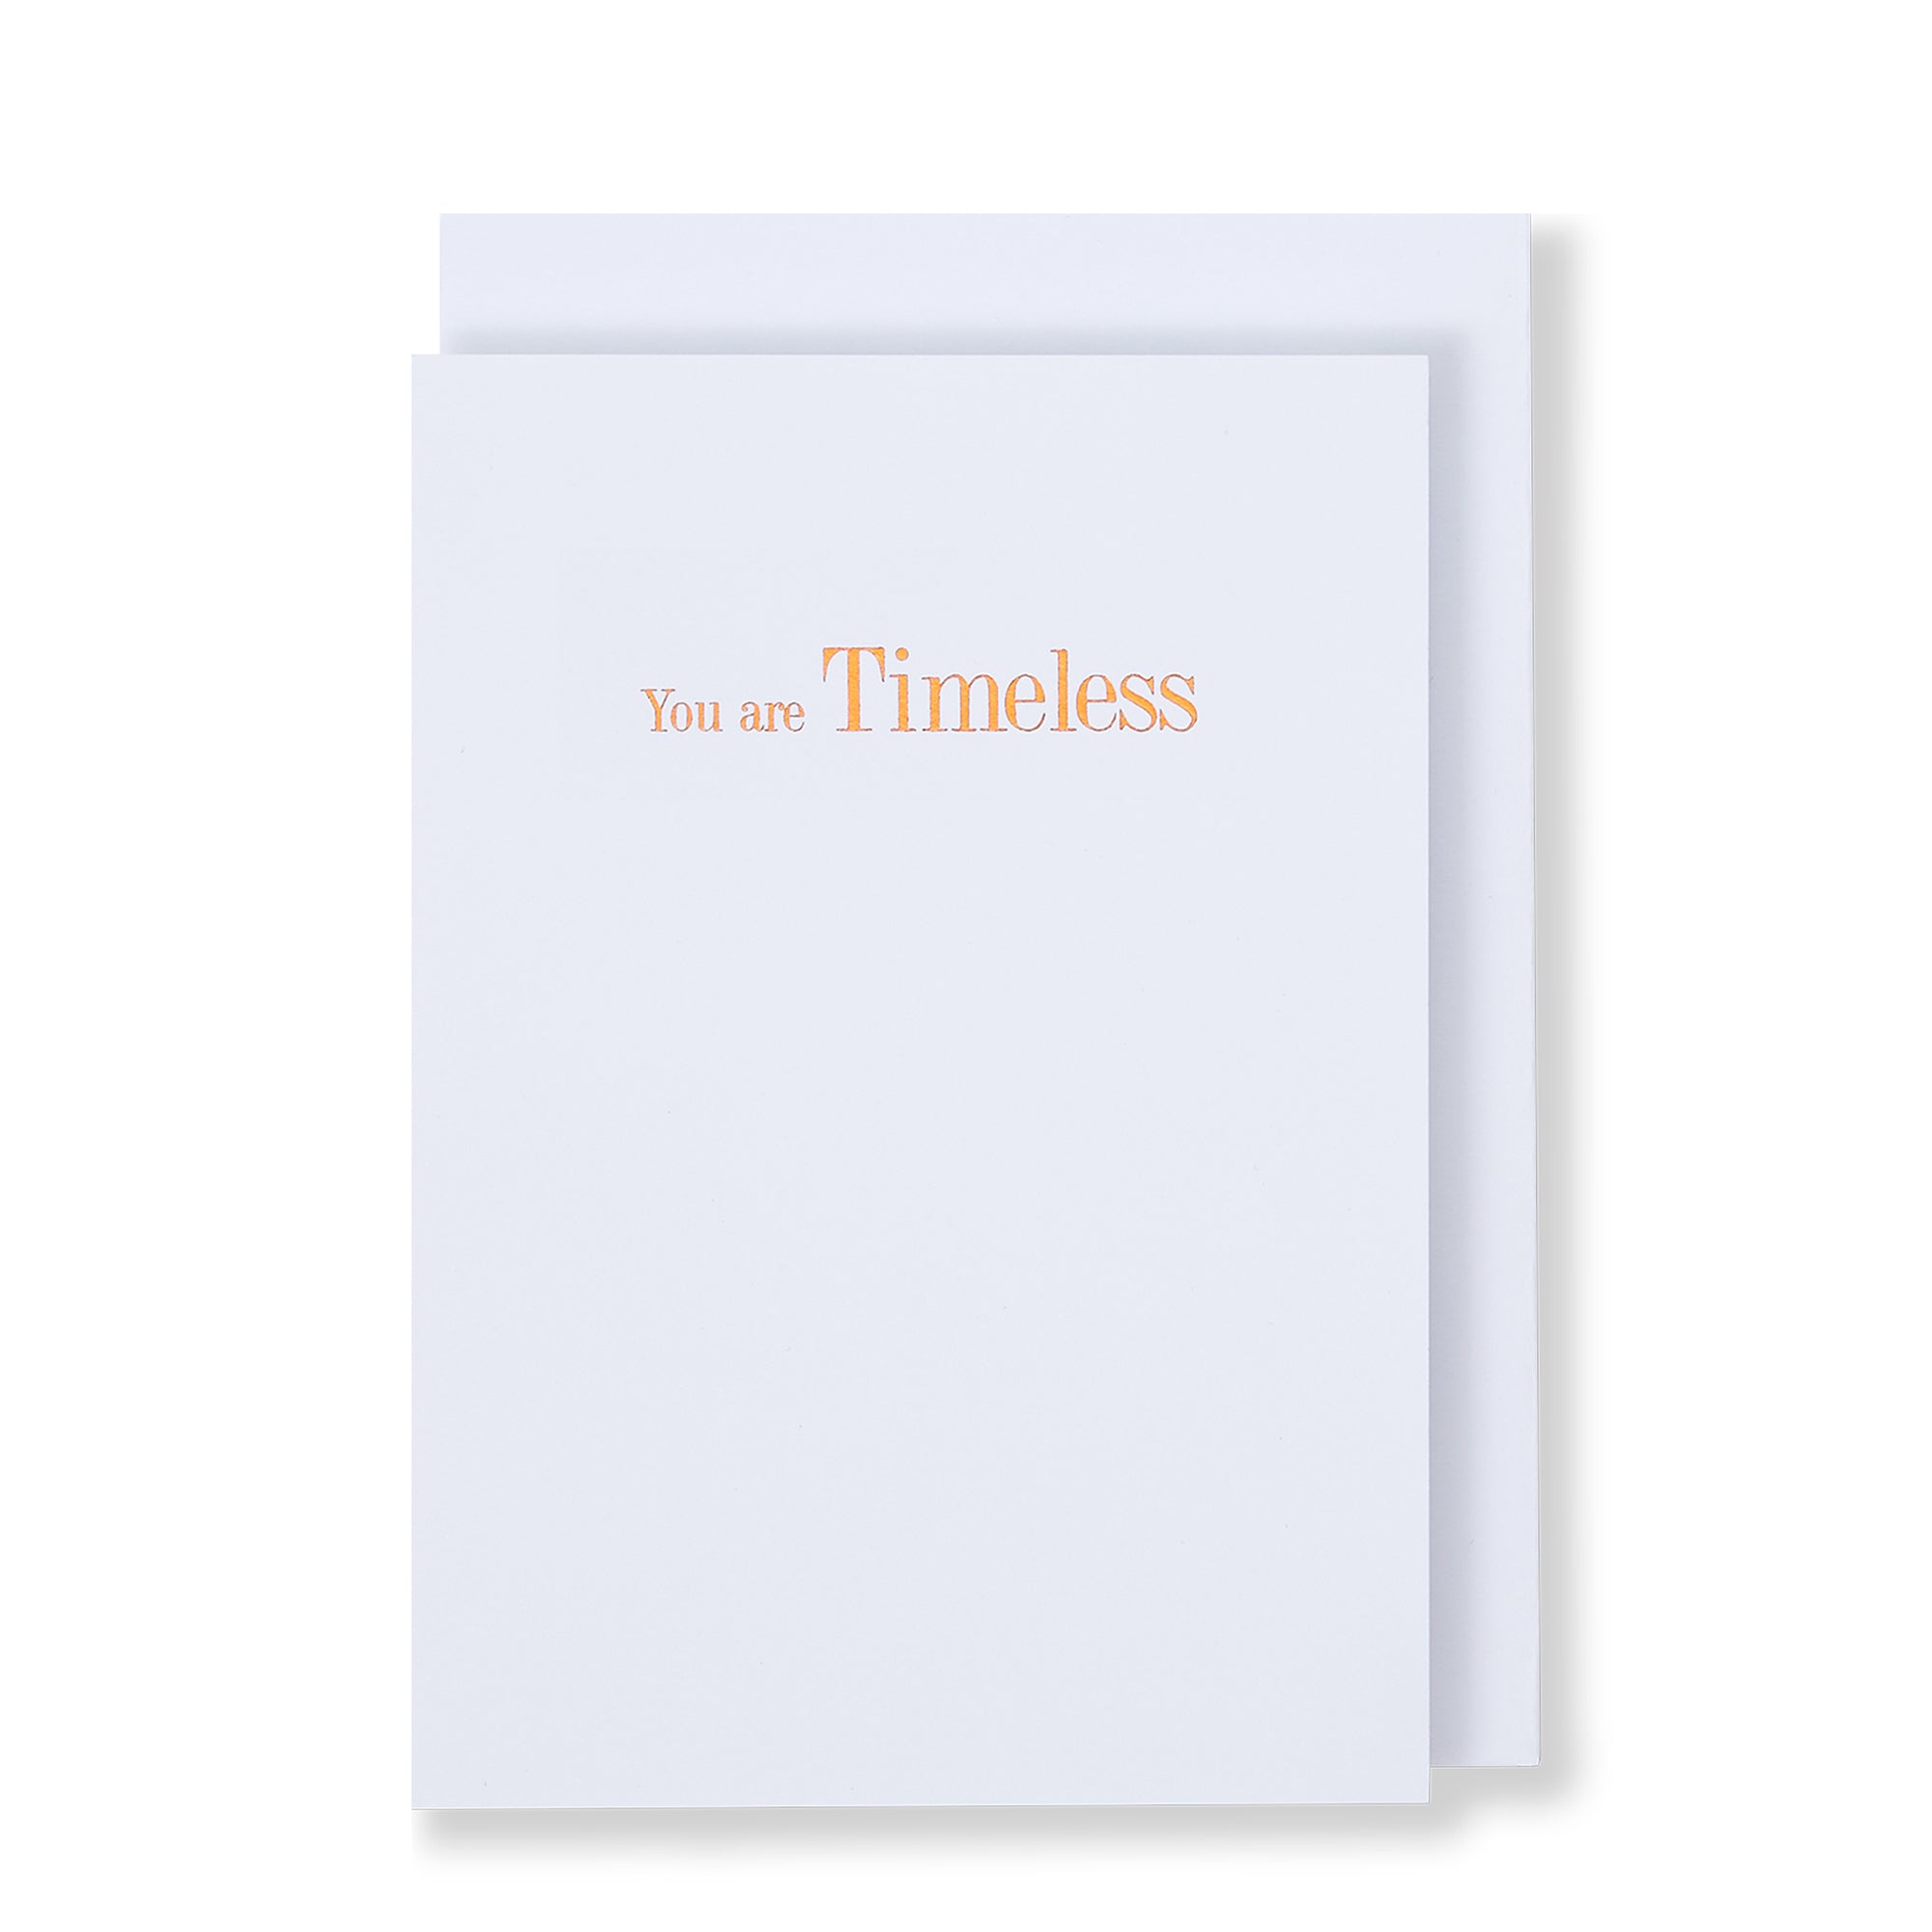 You Are Timeless Greeting Card in White, Front